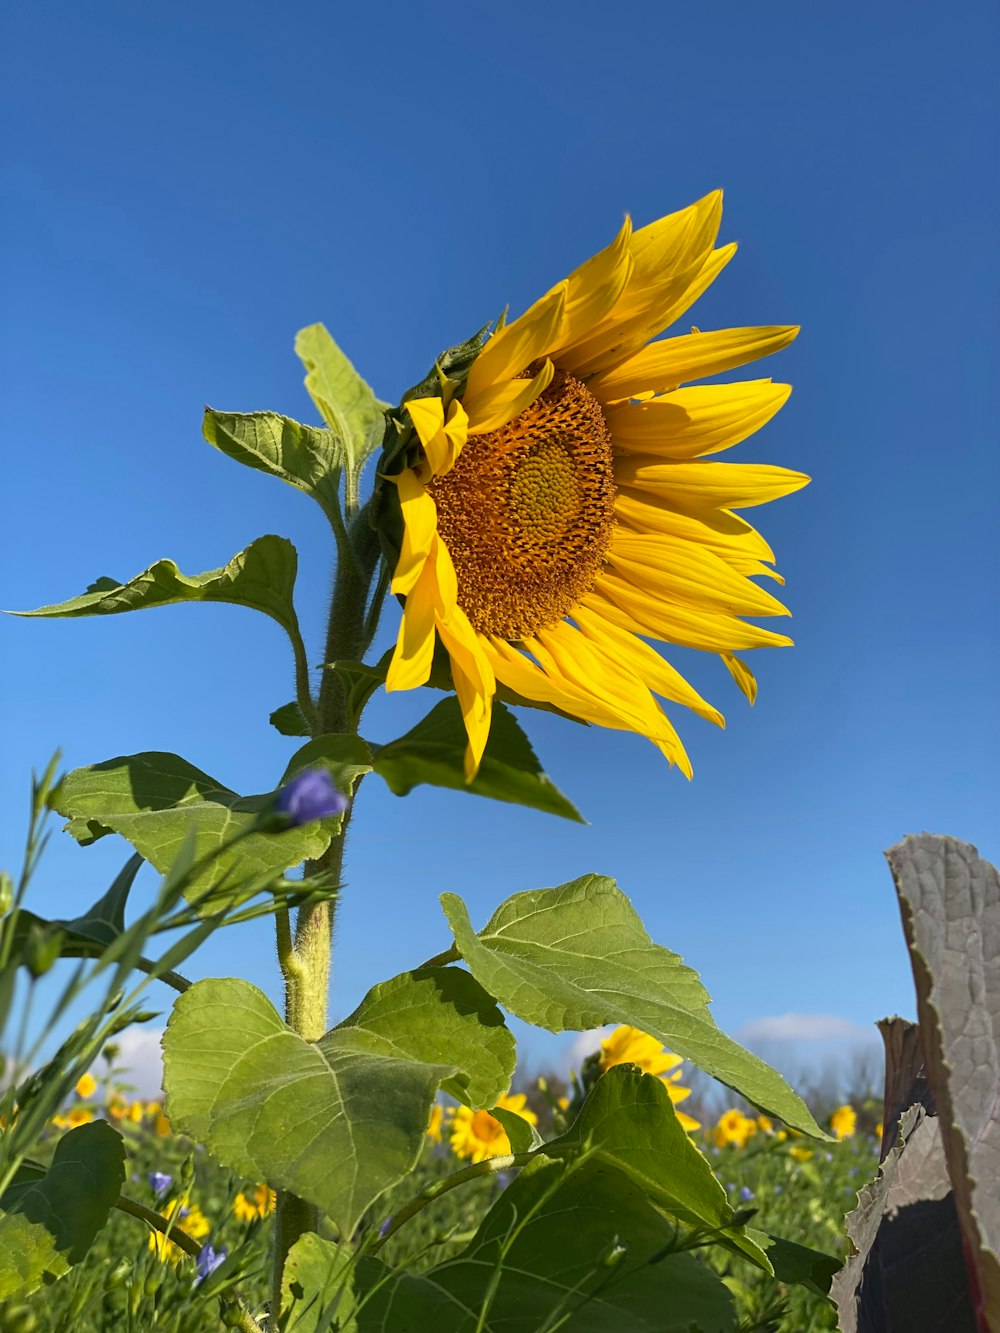 a large sunflower in a field of sunflowers